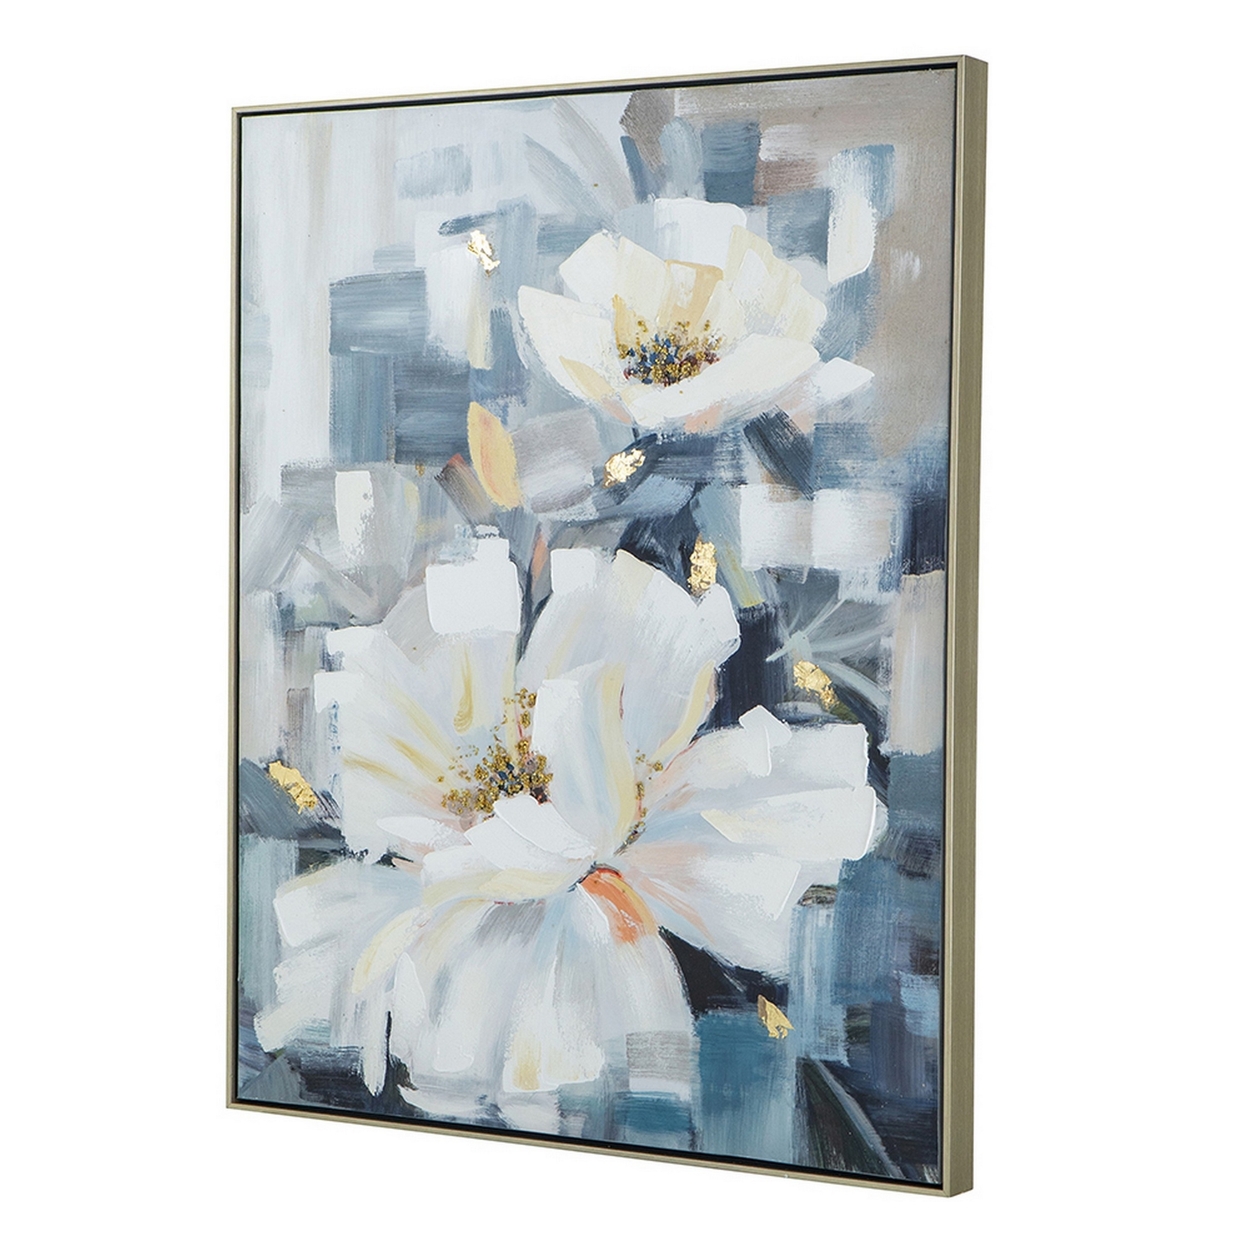 33 X 40 Inch Decorative Wall Art, Floral Oil Painting On Canvas, White Blue- Saltoro Sherpi